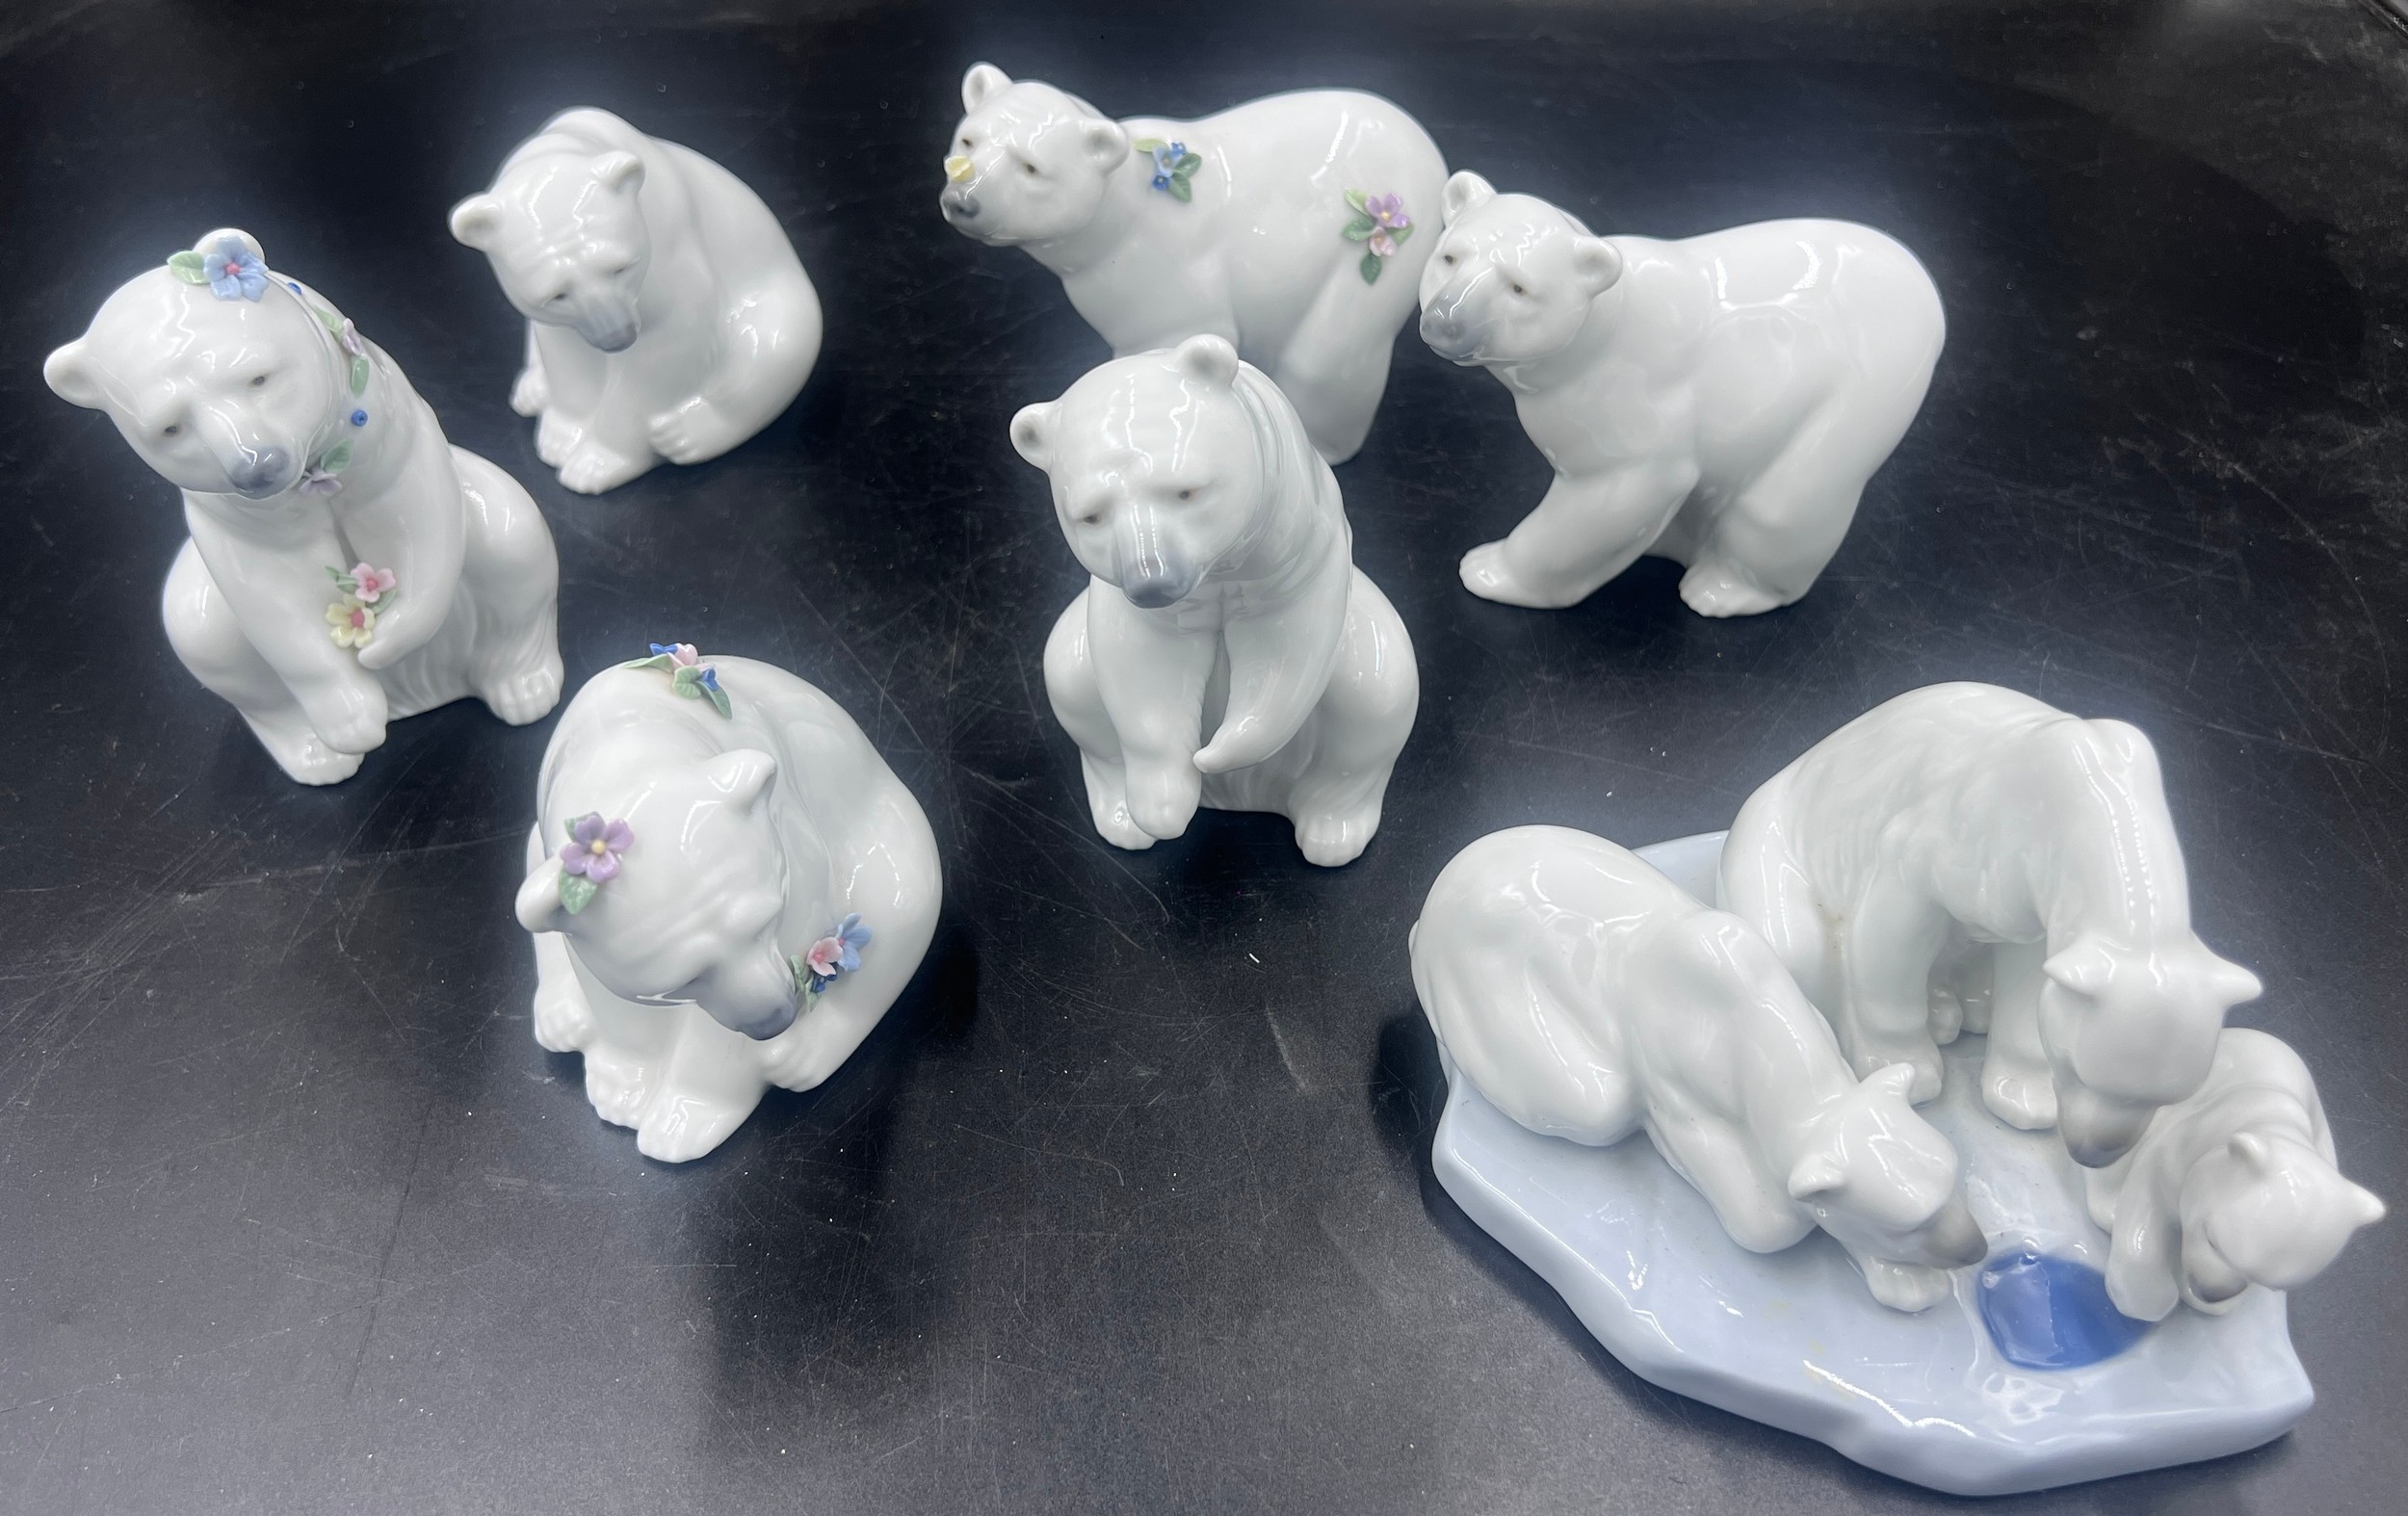 Boxed Lladro Polar Bears to include 1443 Bearly Love, 1207 Polar Bear, 1208 Polar Bear, 6355 Polar